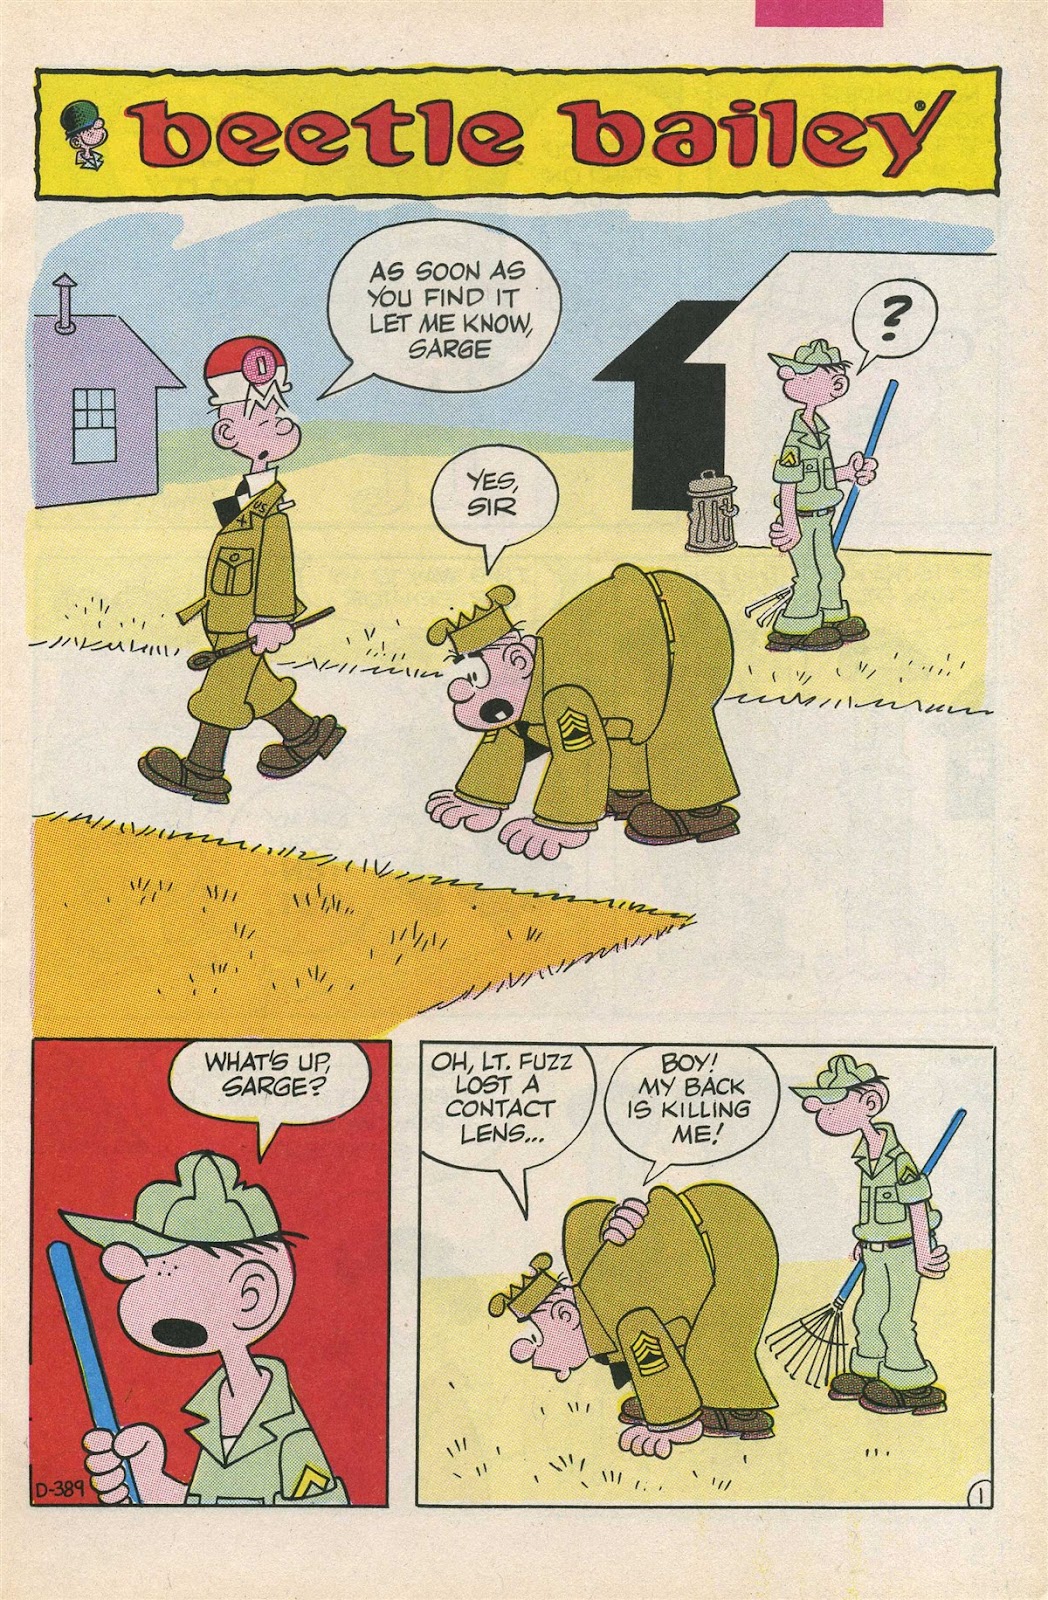 Beetle Bailey 3 | Read Beetle Bailey 3 comic online in high quality. Read  Full Comic online for free - Read comics online in high quality .